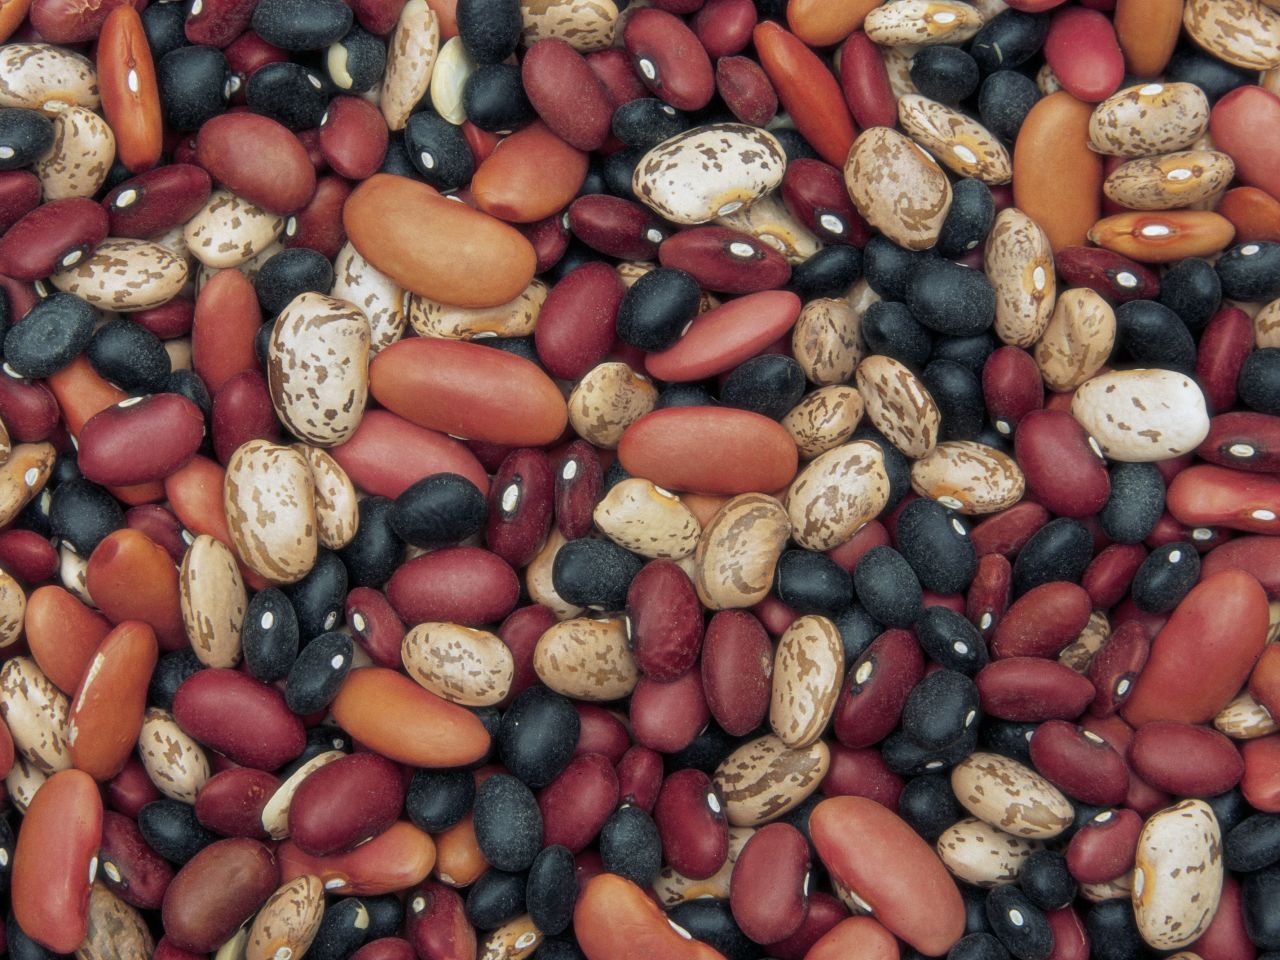 Black, kidney, white and garbanzo beans (also known as chickpeas) all end up on superfood lists because of their high fiber and protein. They fill you up and provide muscle-building material without any of the fat that meat can add to your meal. 